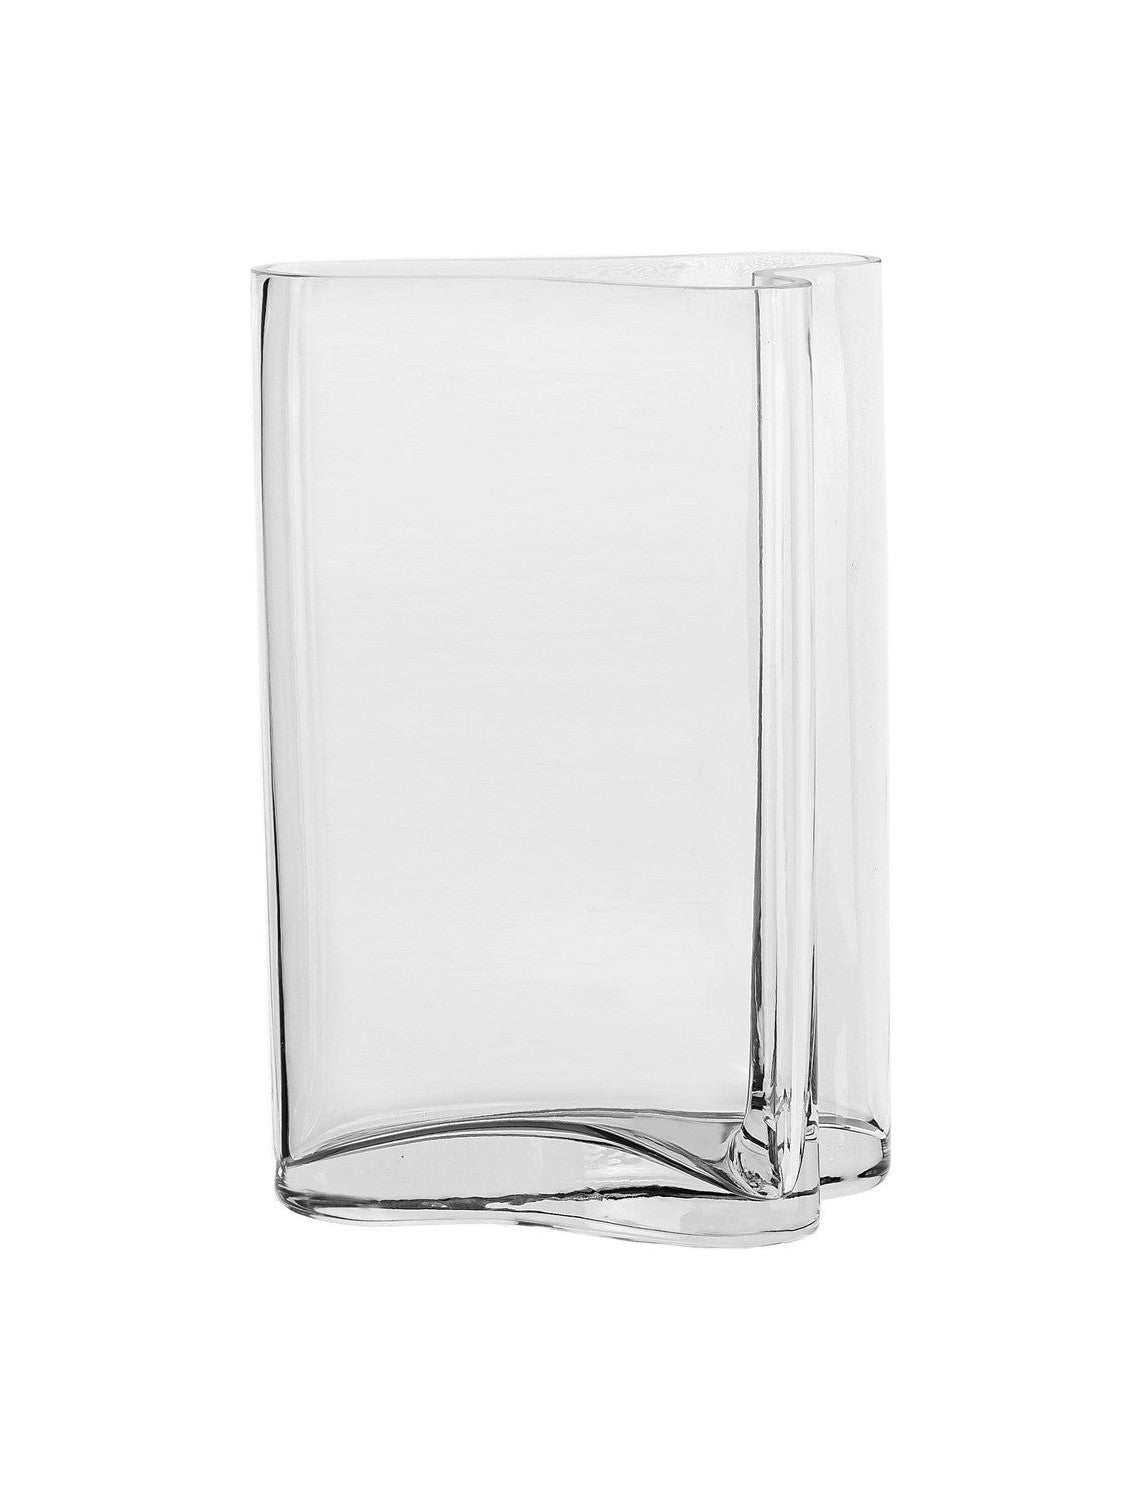 Modern design tall glass vase inspired by CORAL + Aalto, COR30CL